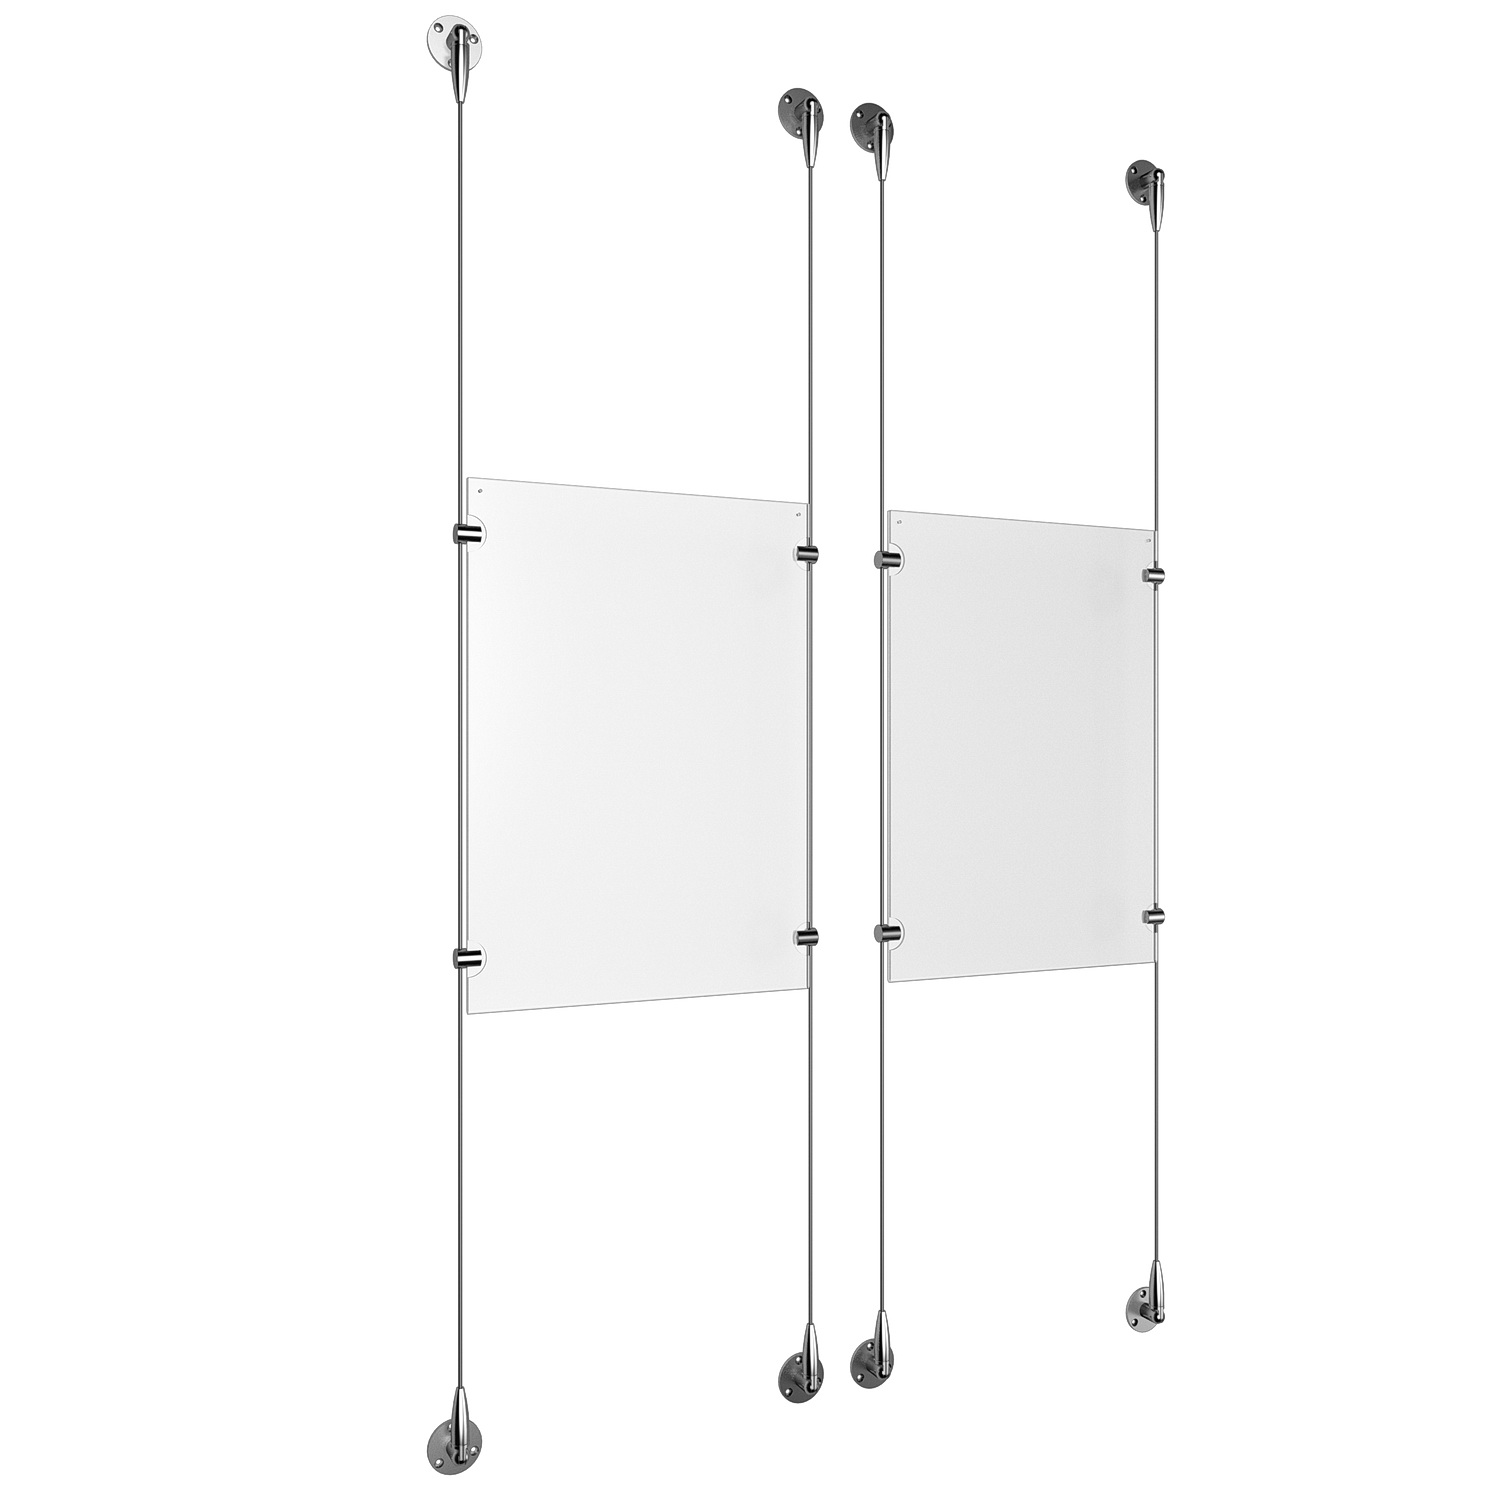 (2) 11'' Width x 17'' Height Clear Acrylic Frame & (4) Stainless Steel Satin Brushed Adjustable Angle Signature 1/8'' Cable Systems with (8) Single-Sided Panel Grippers